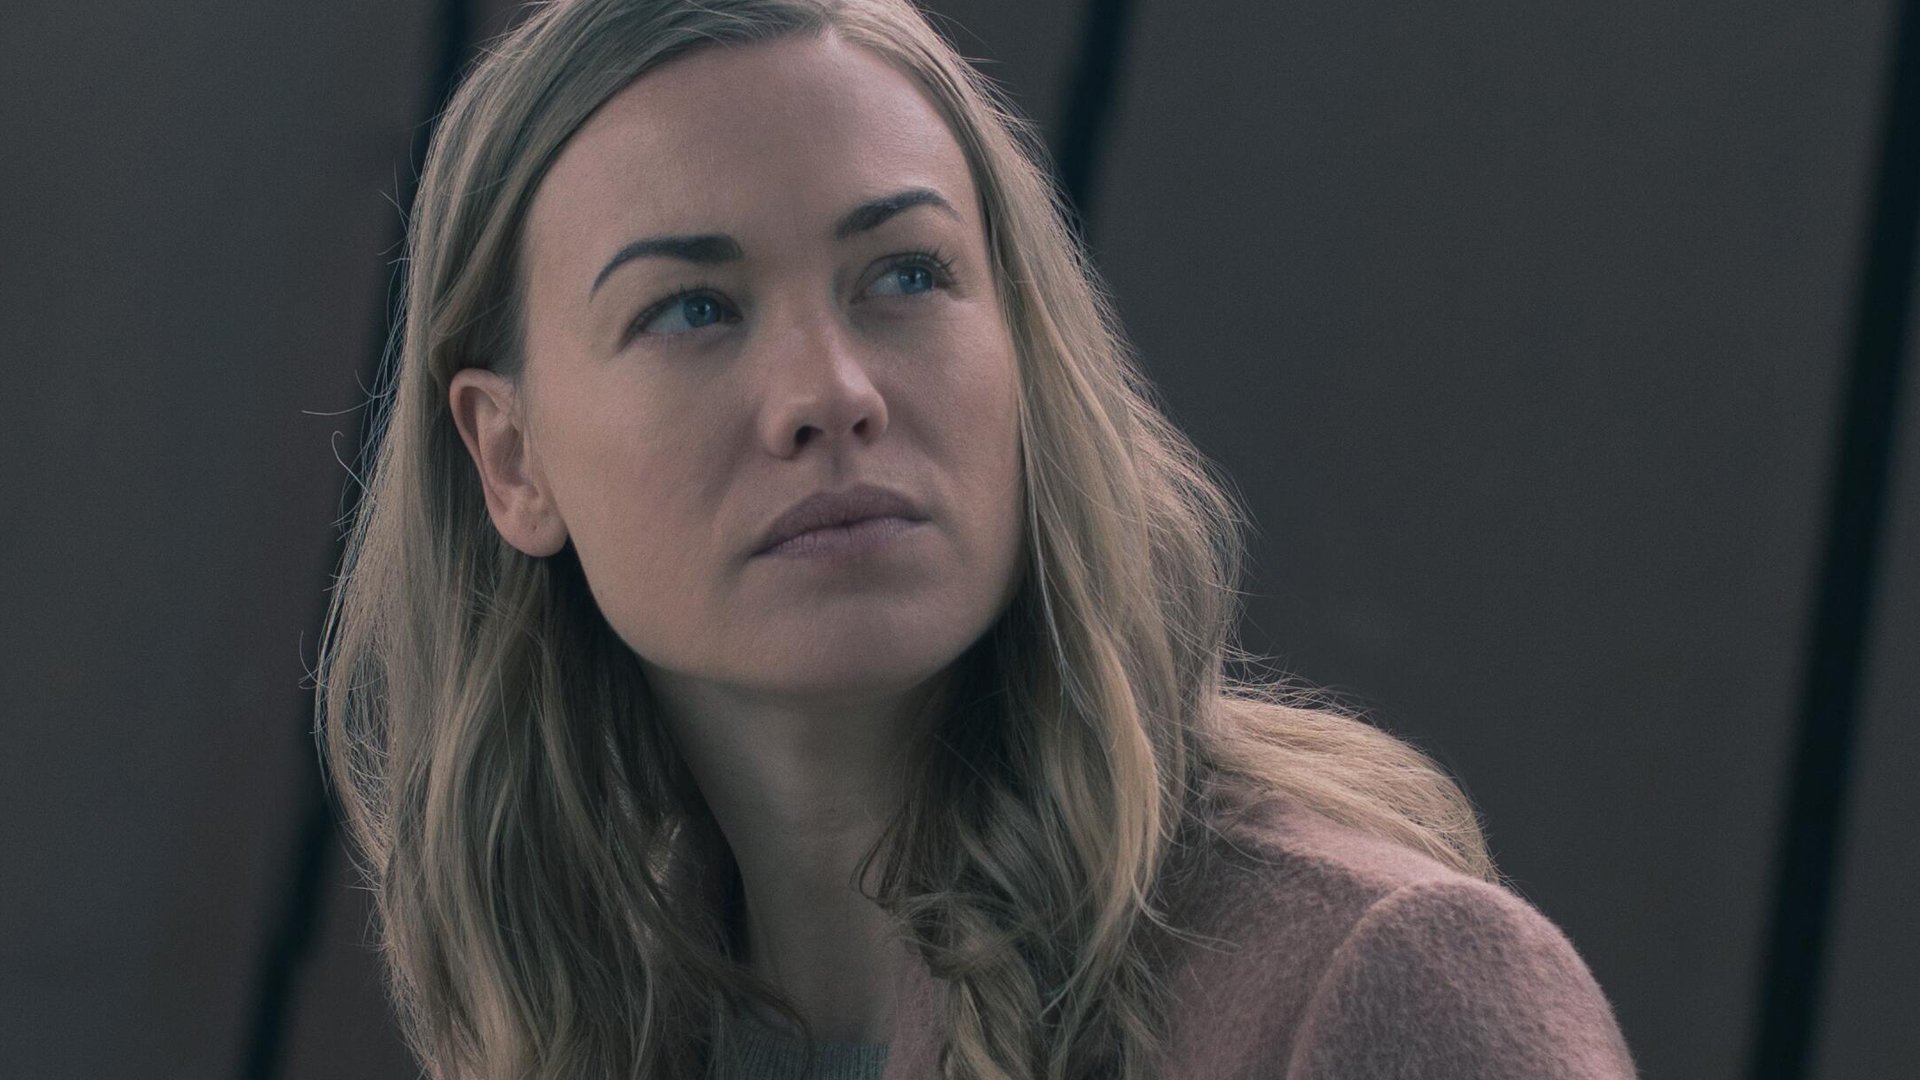 Yvonne Strahovski as Serena Joy Waterford looking up at someone in ‘The Handmaid’s Tale’ Season 3 Episode 13